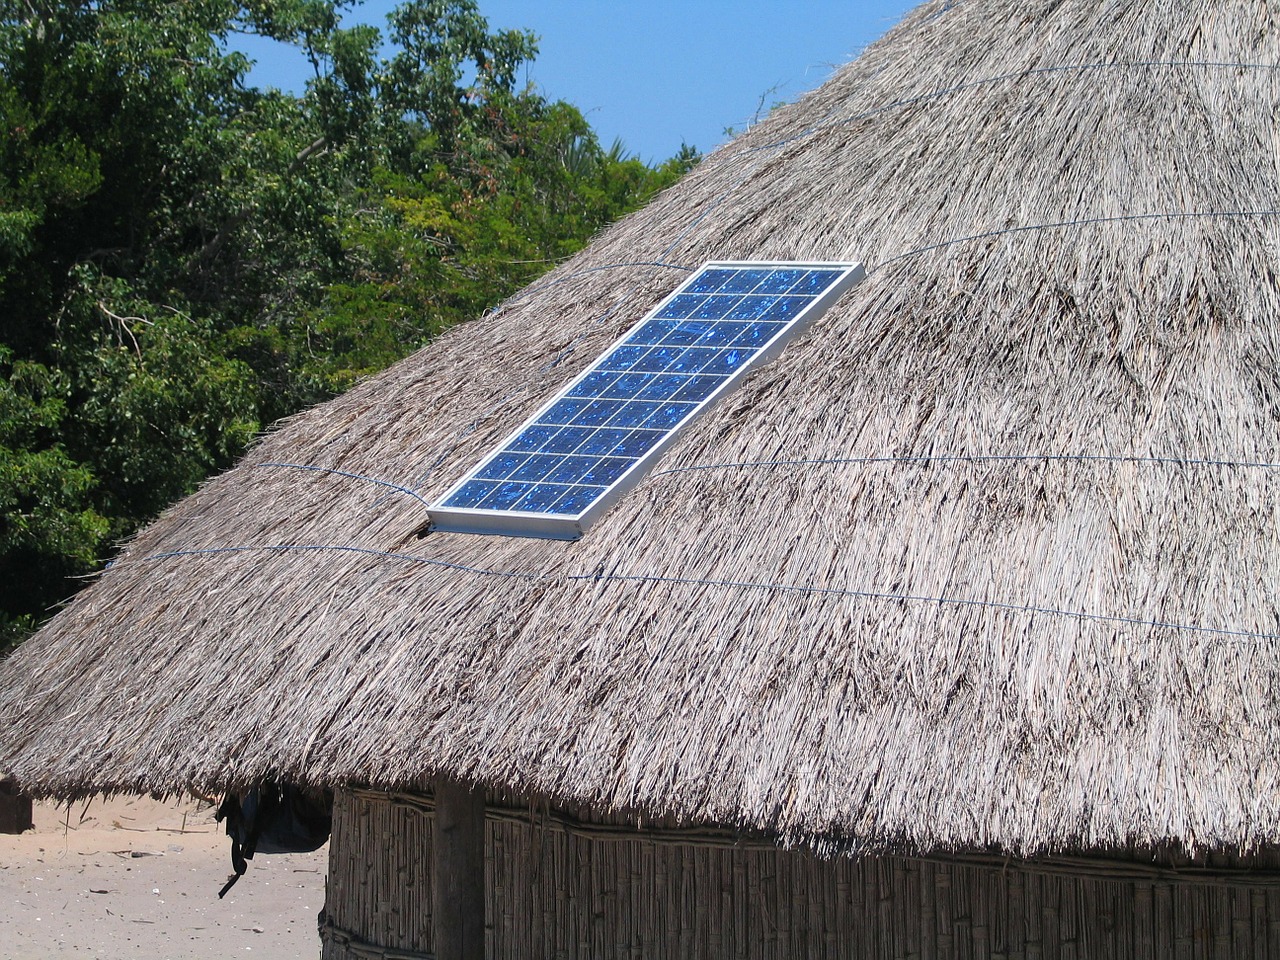 Where You Should Get Your Home Solar Energy Products